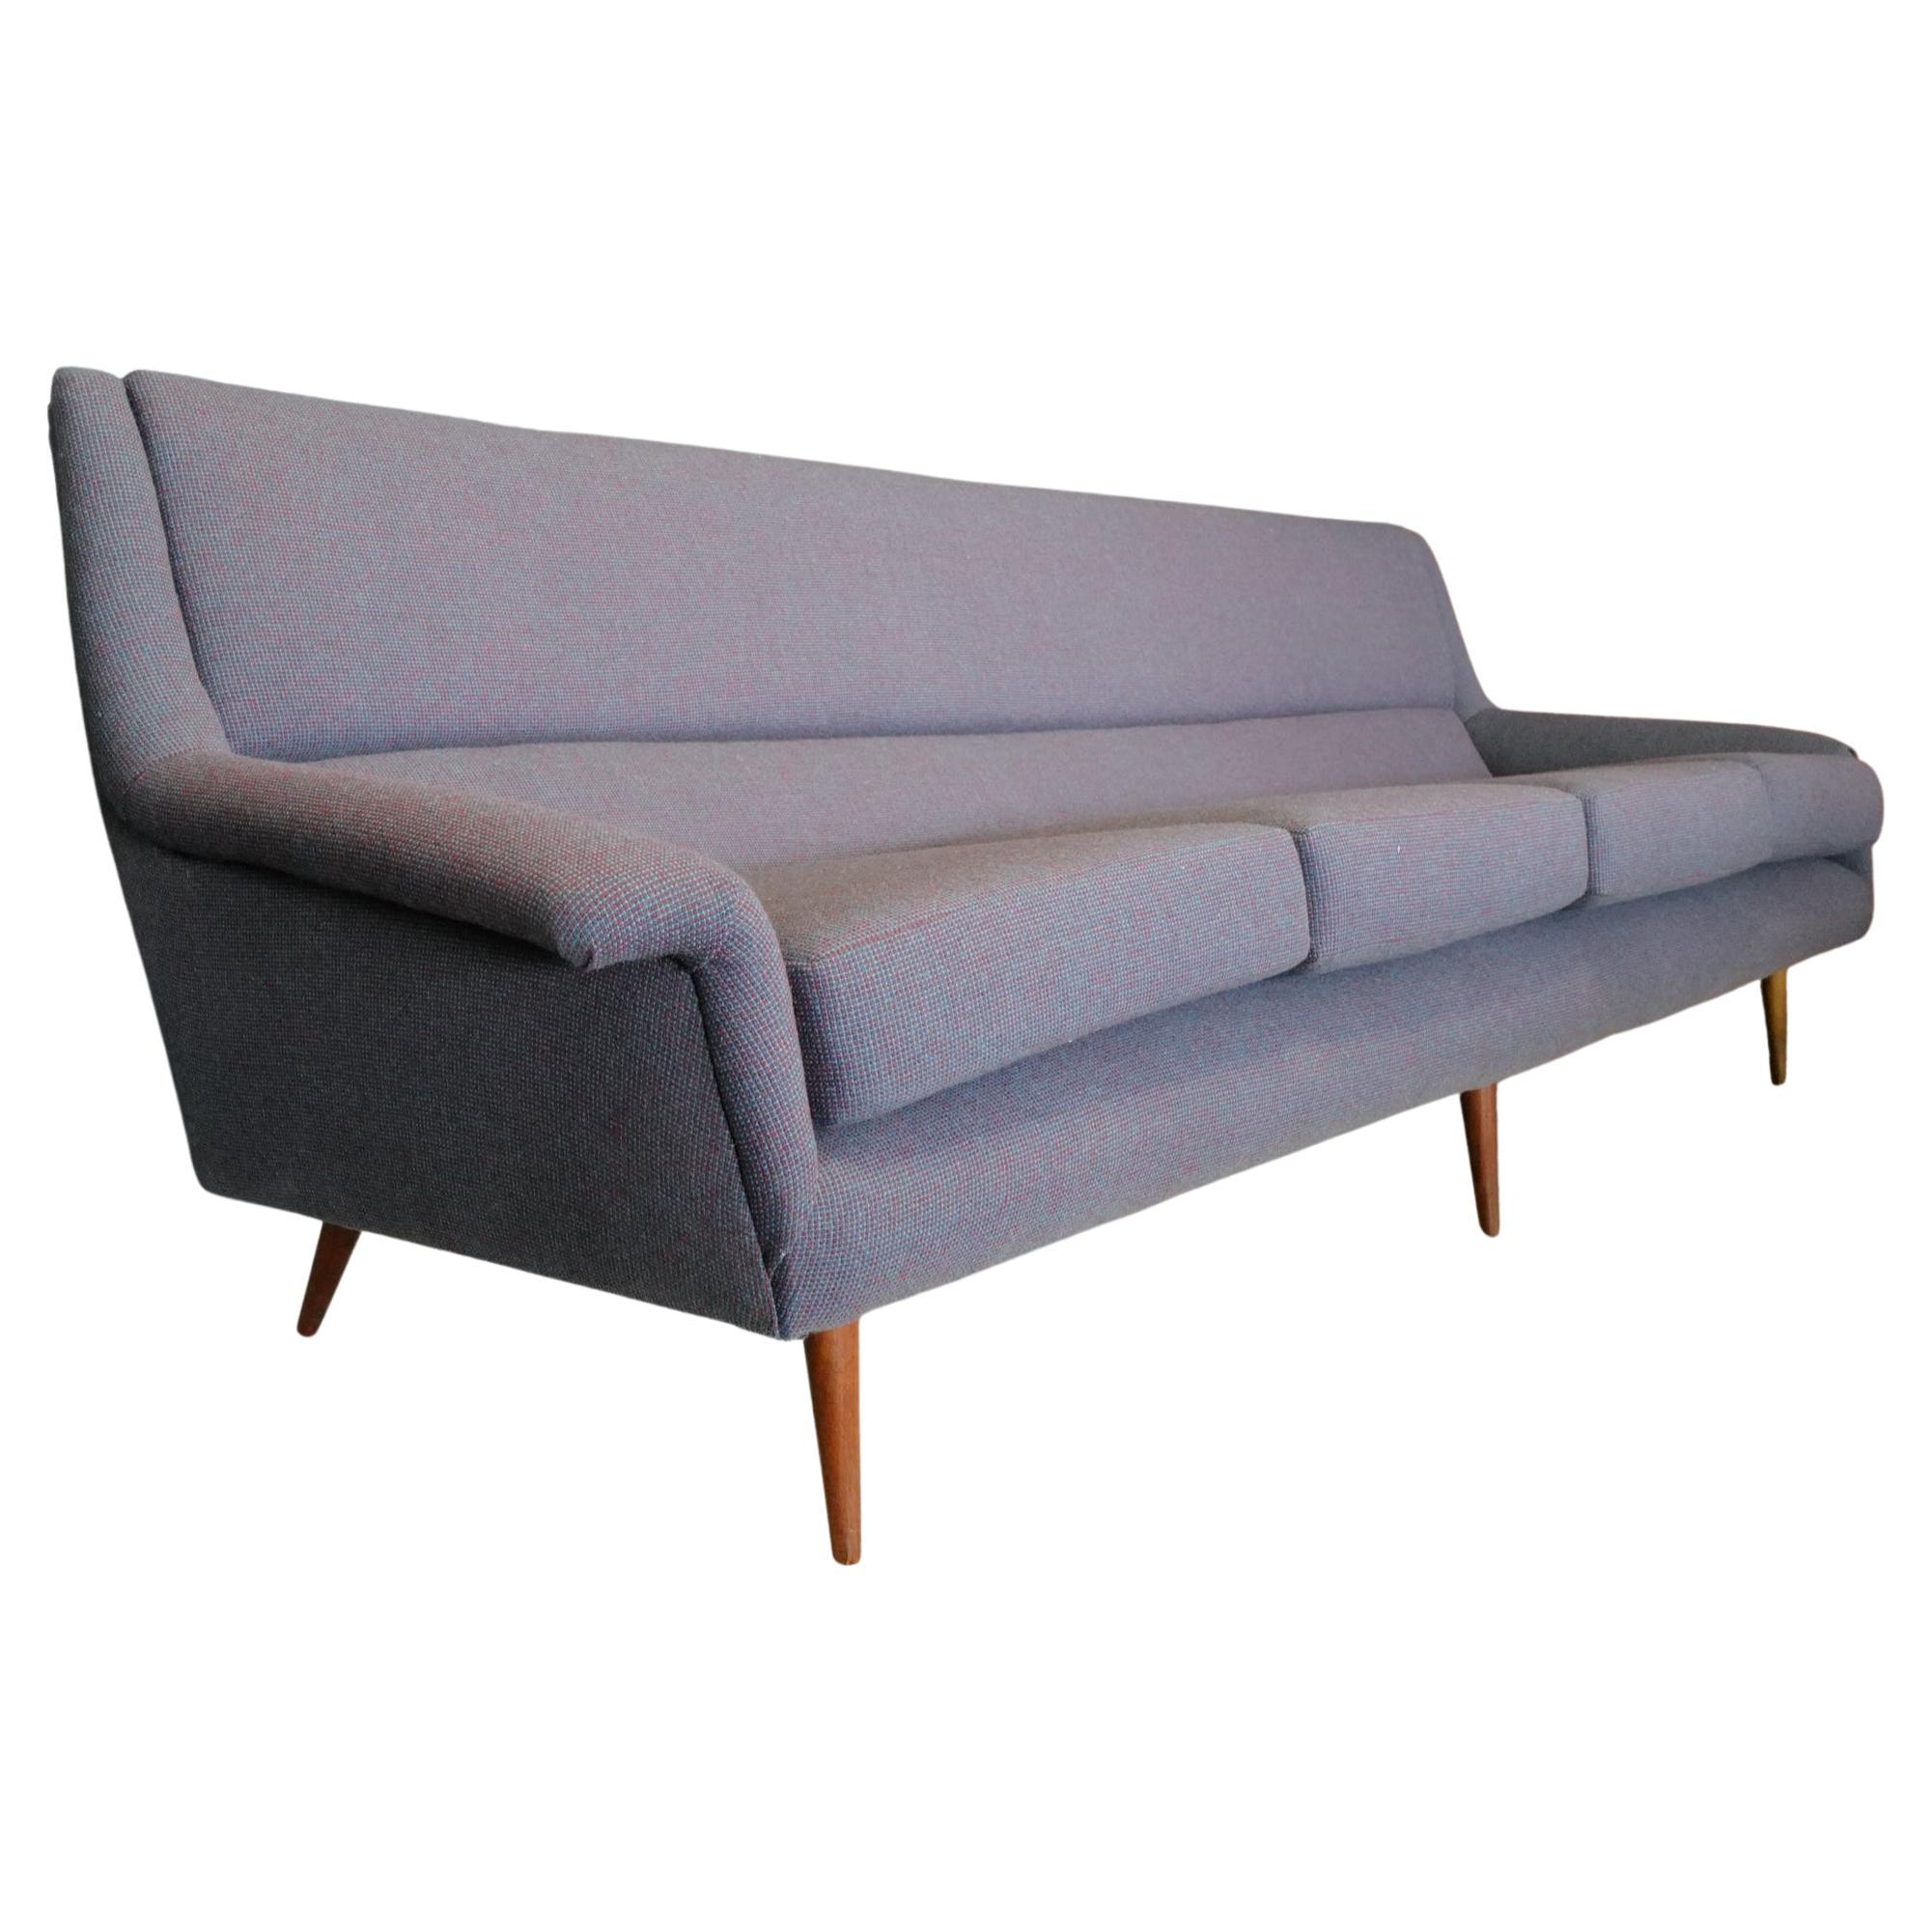 Milo Baughman's tapered leg sofa, adorned with a fresh Herman Miller, Alexander Girard fabric and new foam, exudes timeless sophistication. The sleek, tapered legs provide a modern touch to the classic silhouette. The upholstery, featuring Alexander